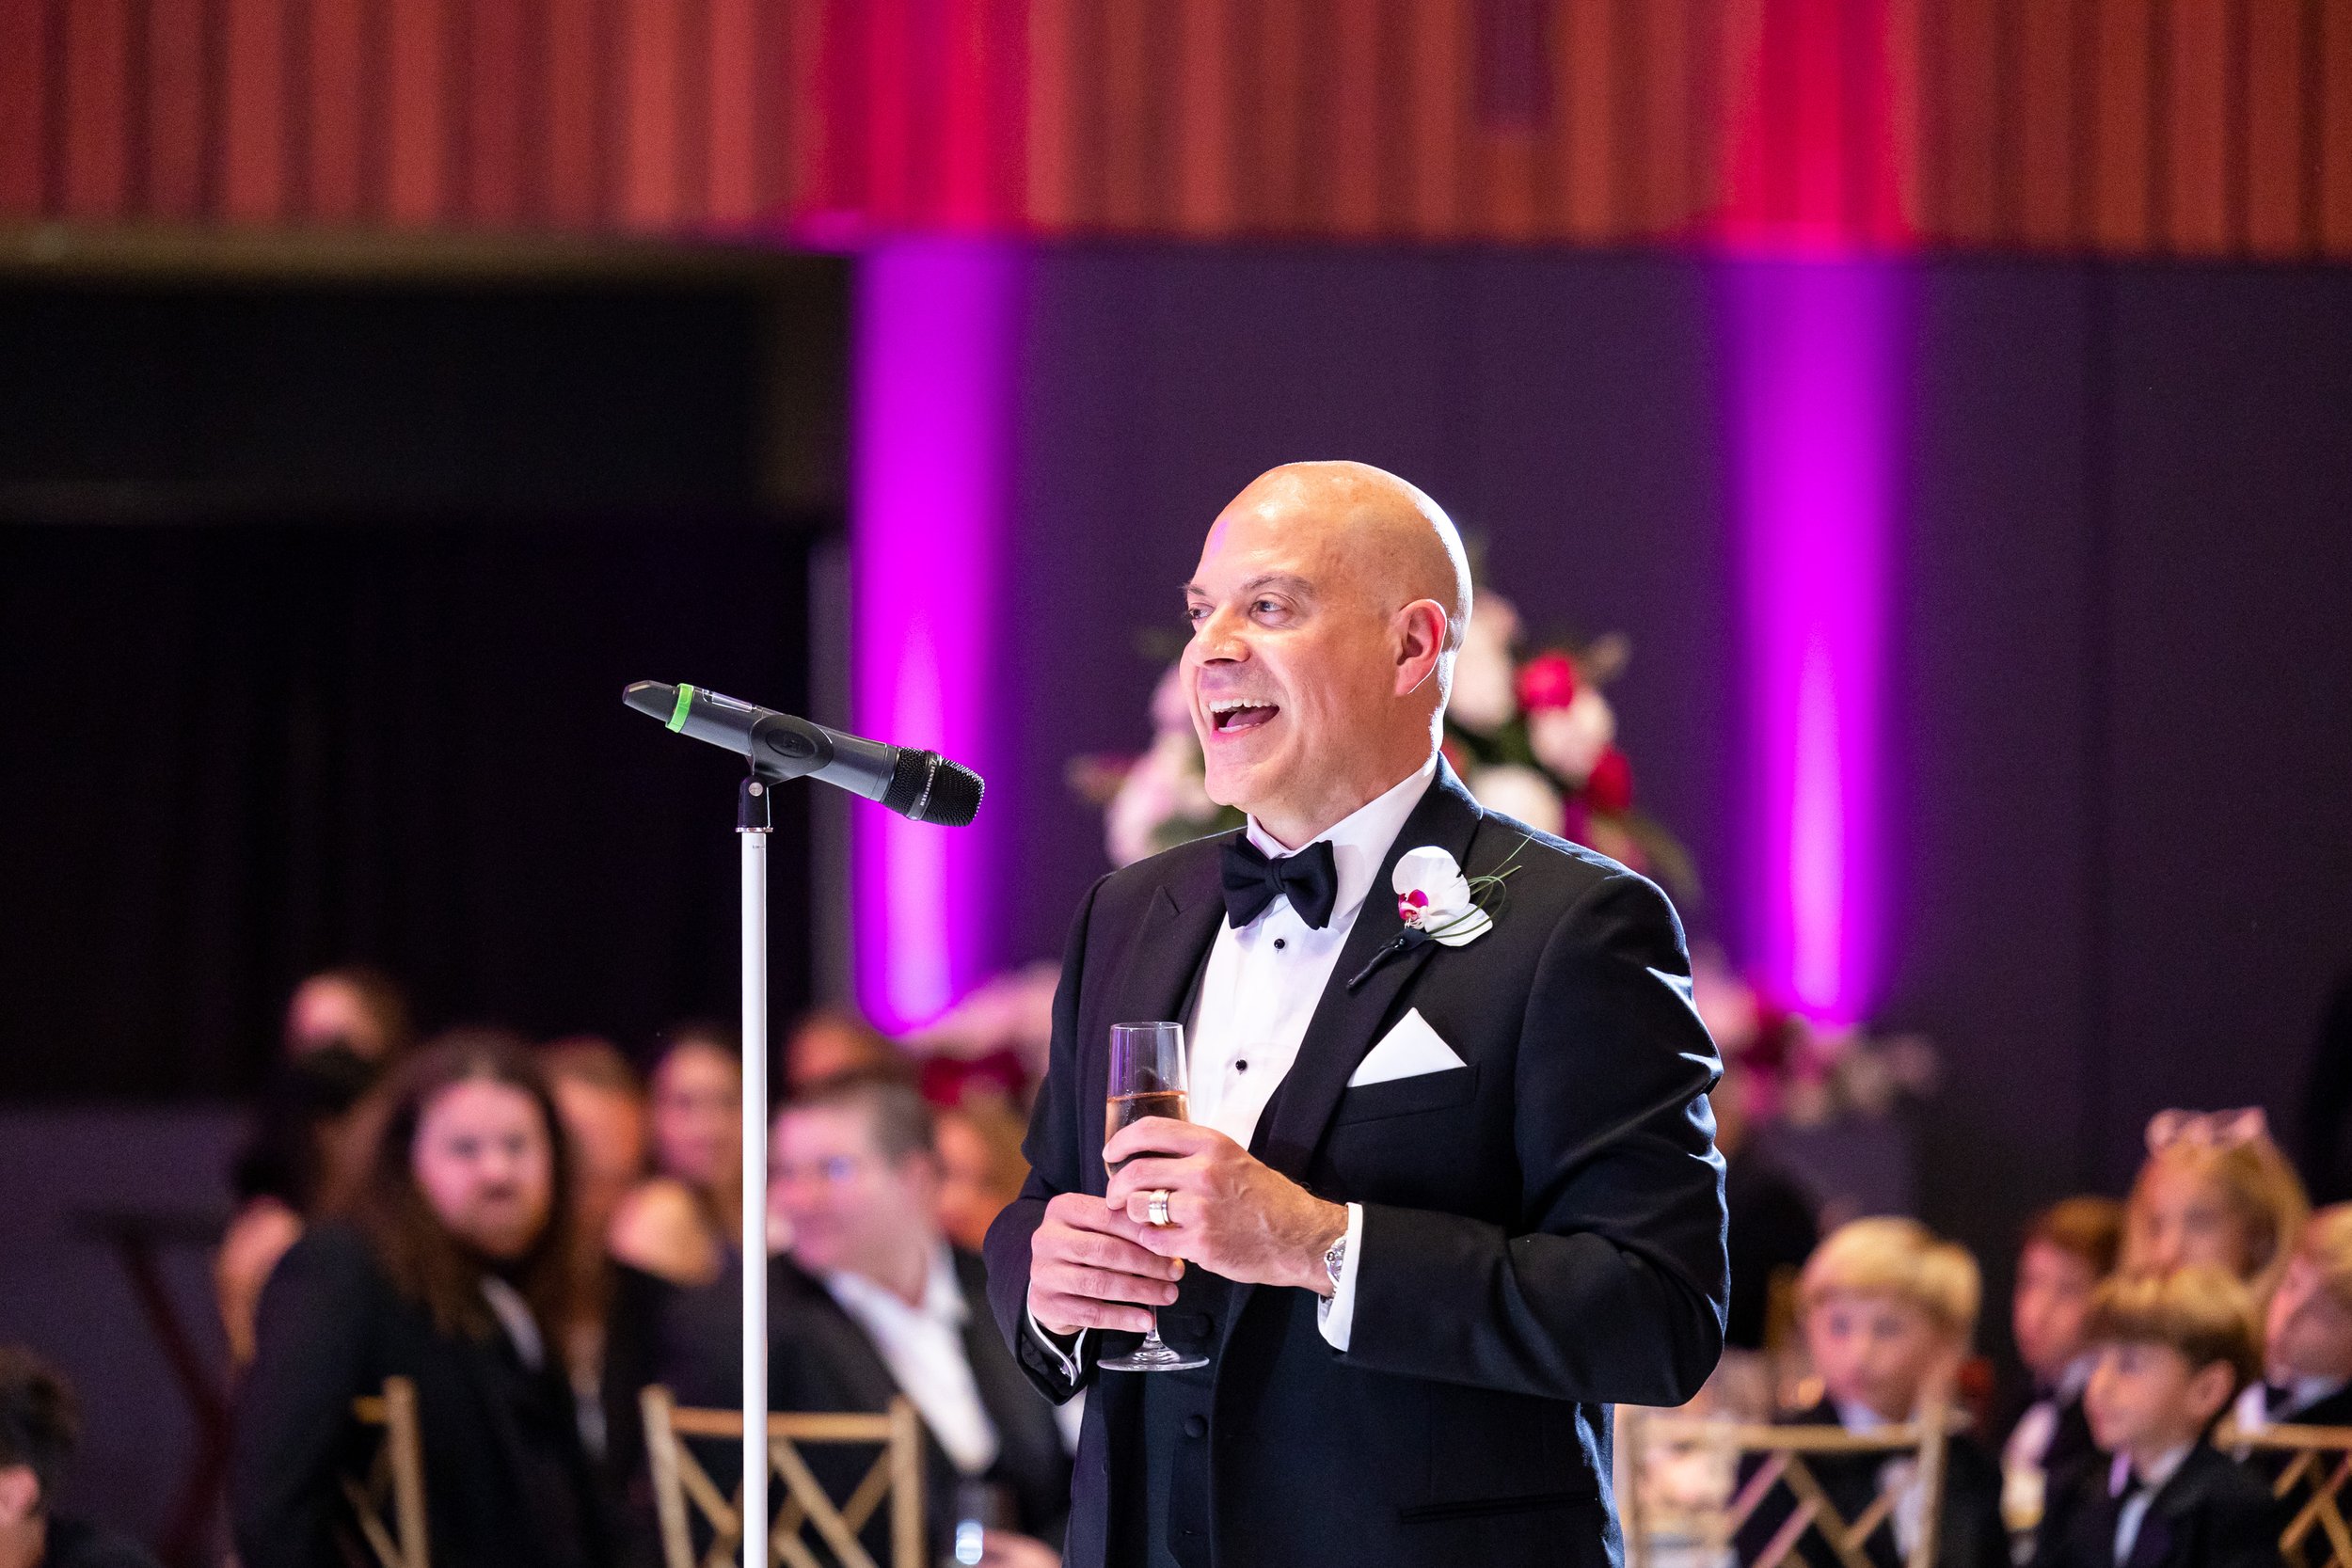 Father of the bride gives funny wedding speech to couple at wedding reception